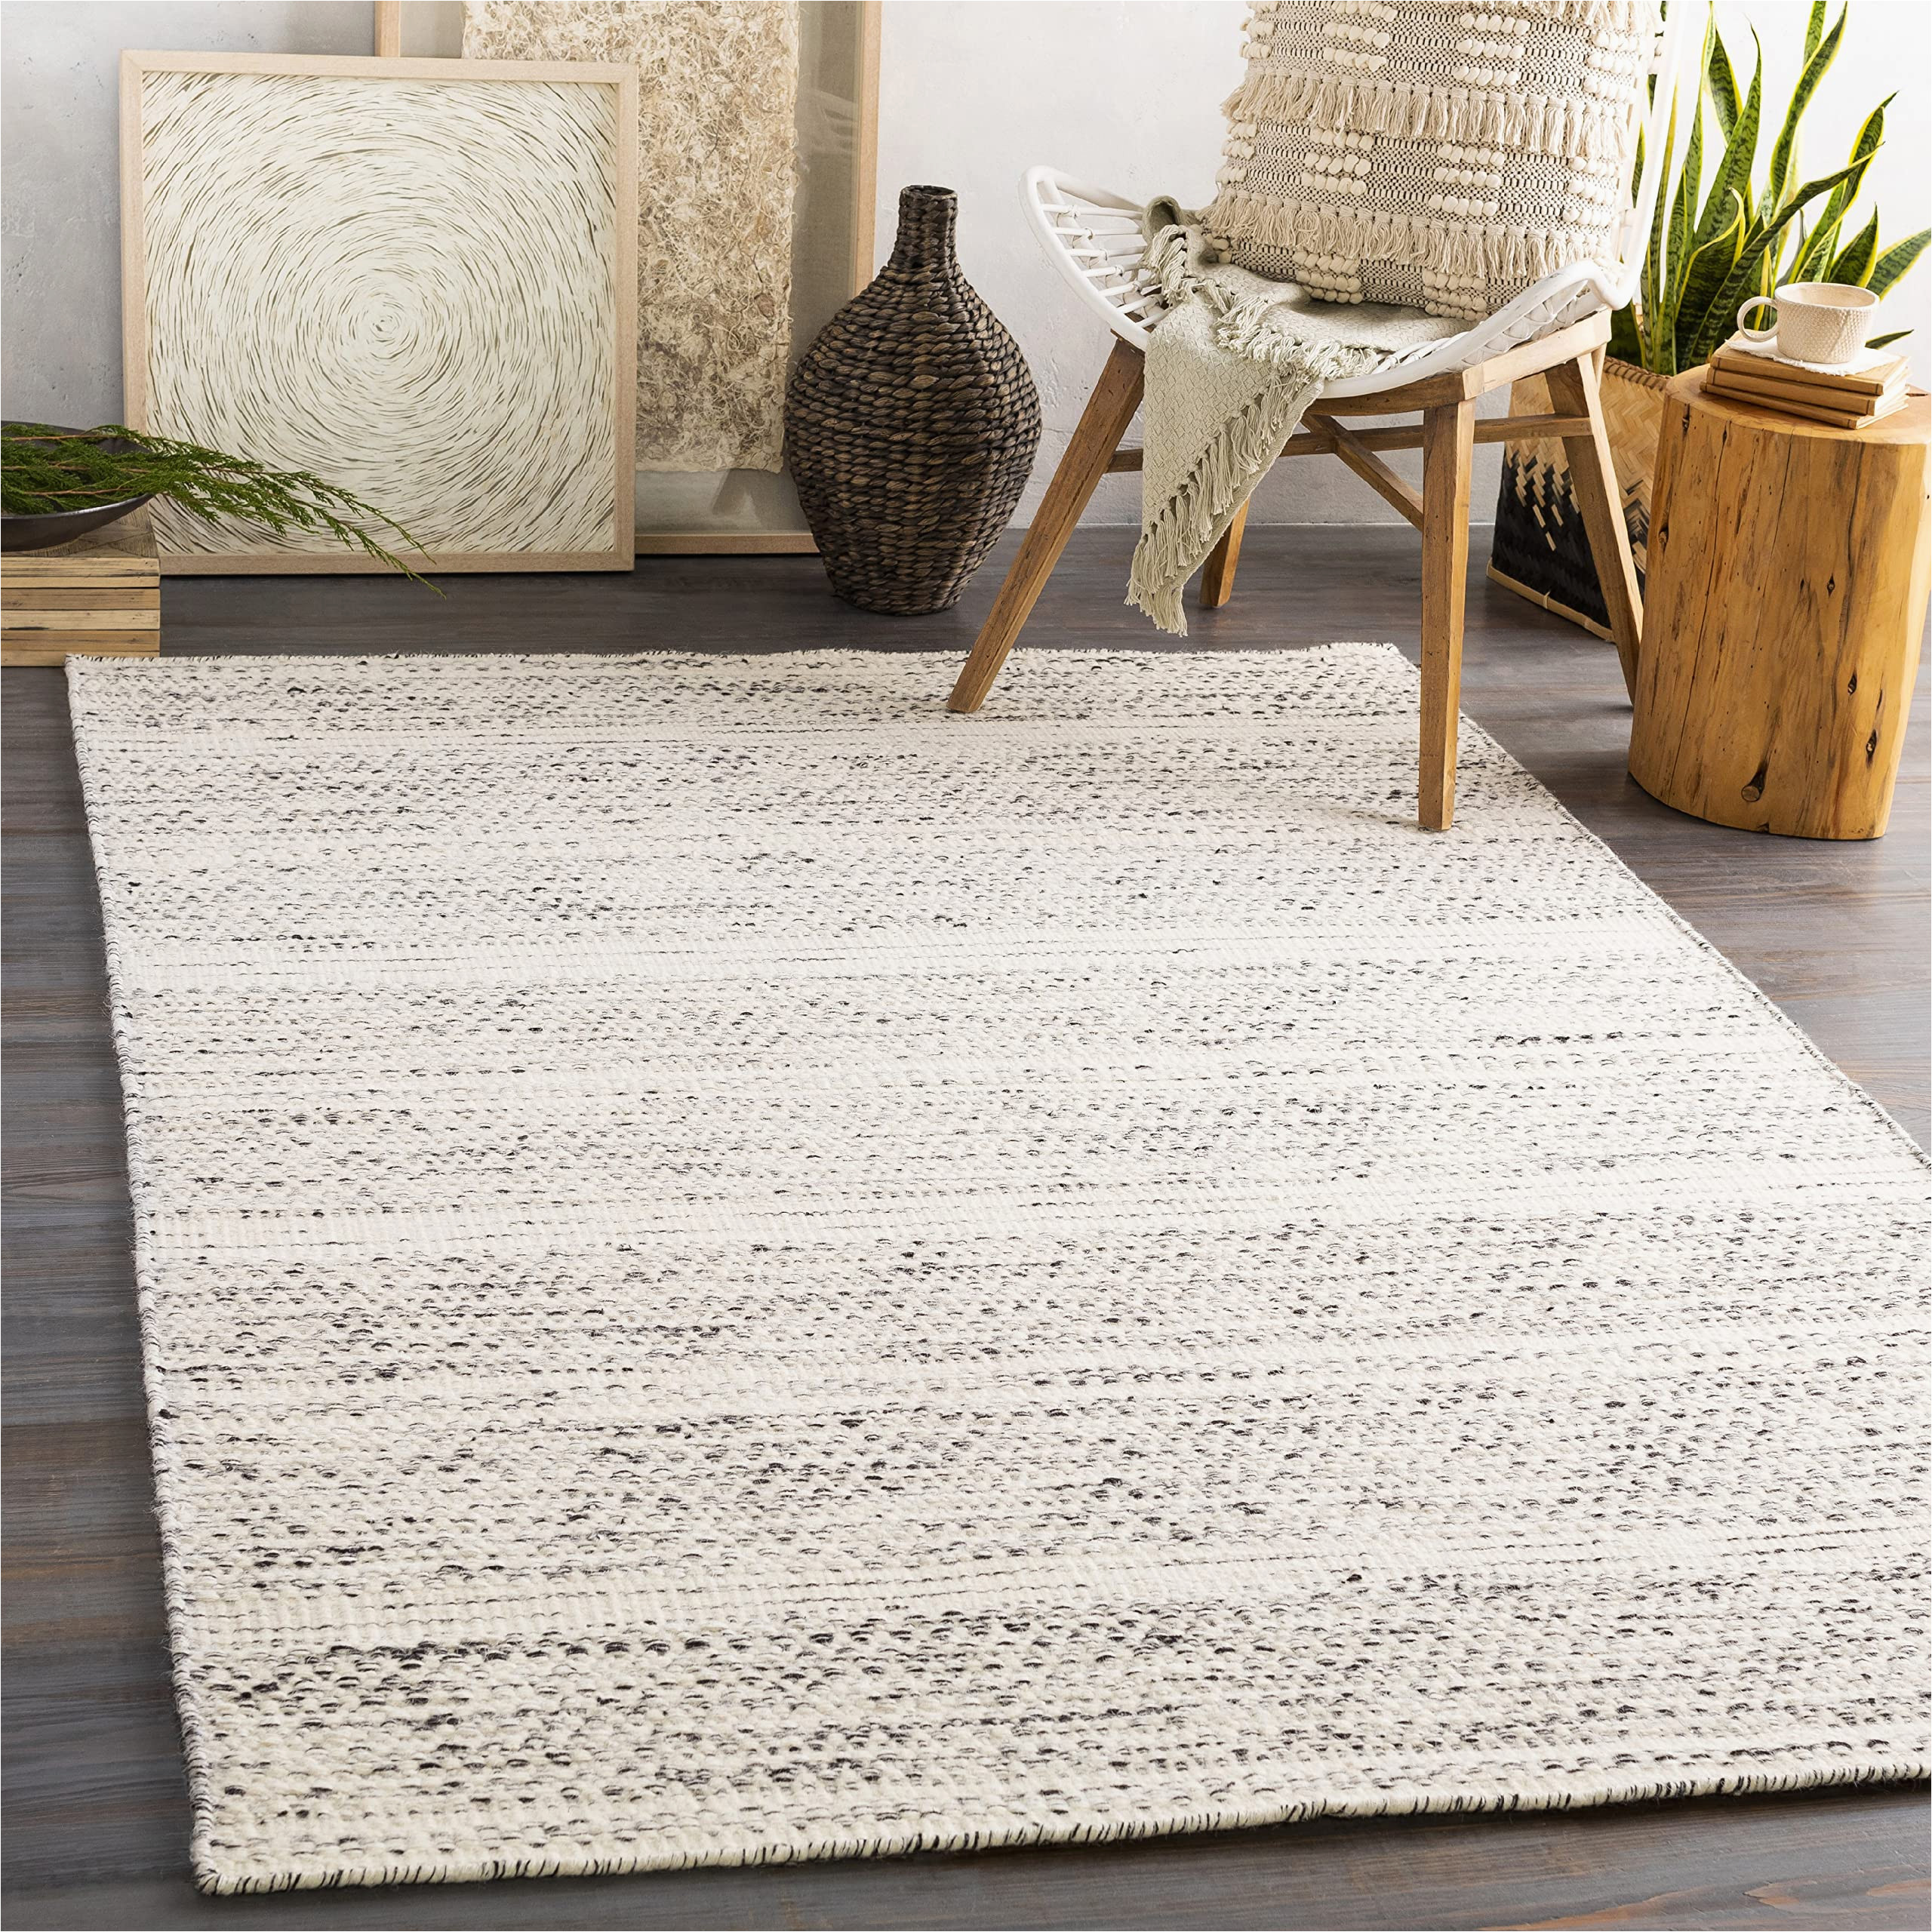 10 X 14 area Rugs Cheap Mark&day area Rugs, 10×14 Marie Modern Cream area Rug, White / Blue / Black Carpet for Living Room, Bedroom or Kitchen (10′ X 14′)